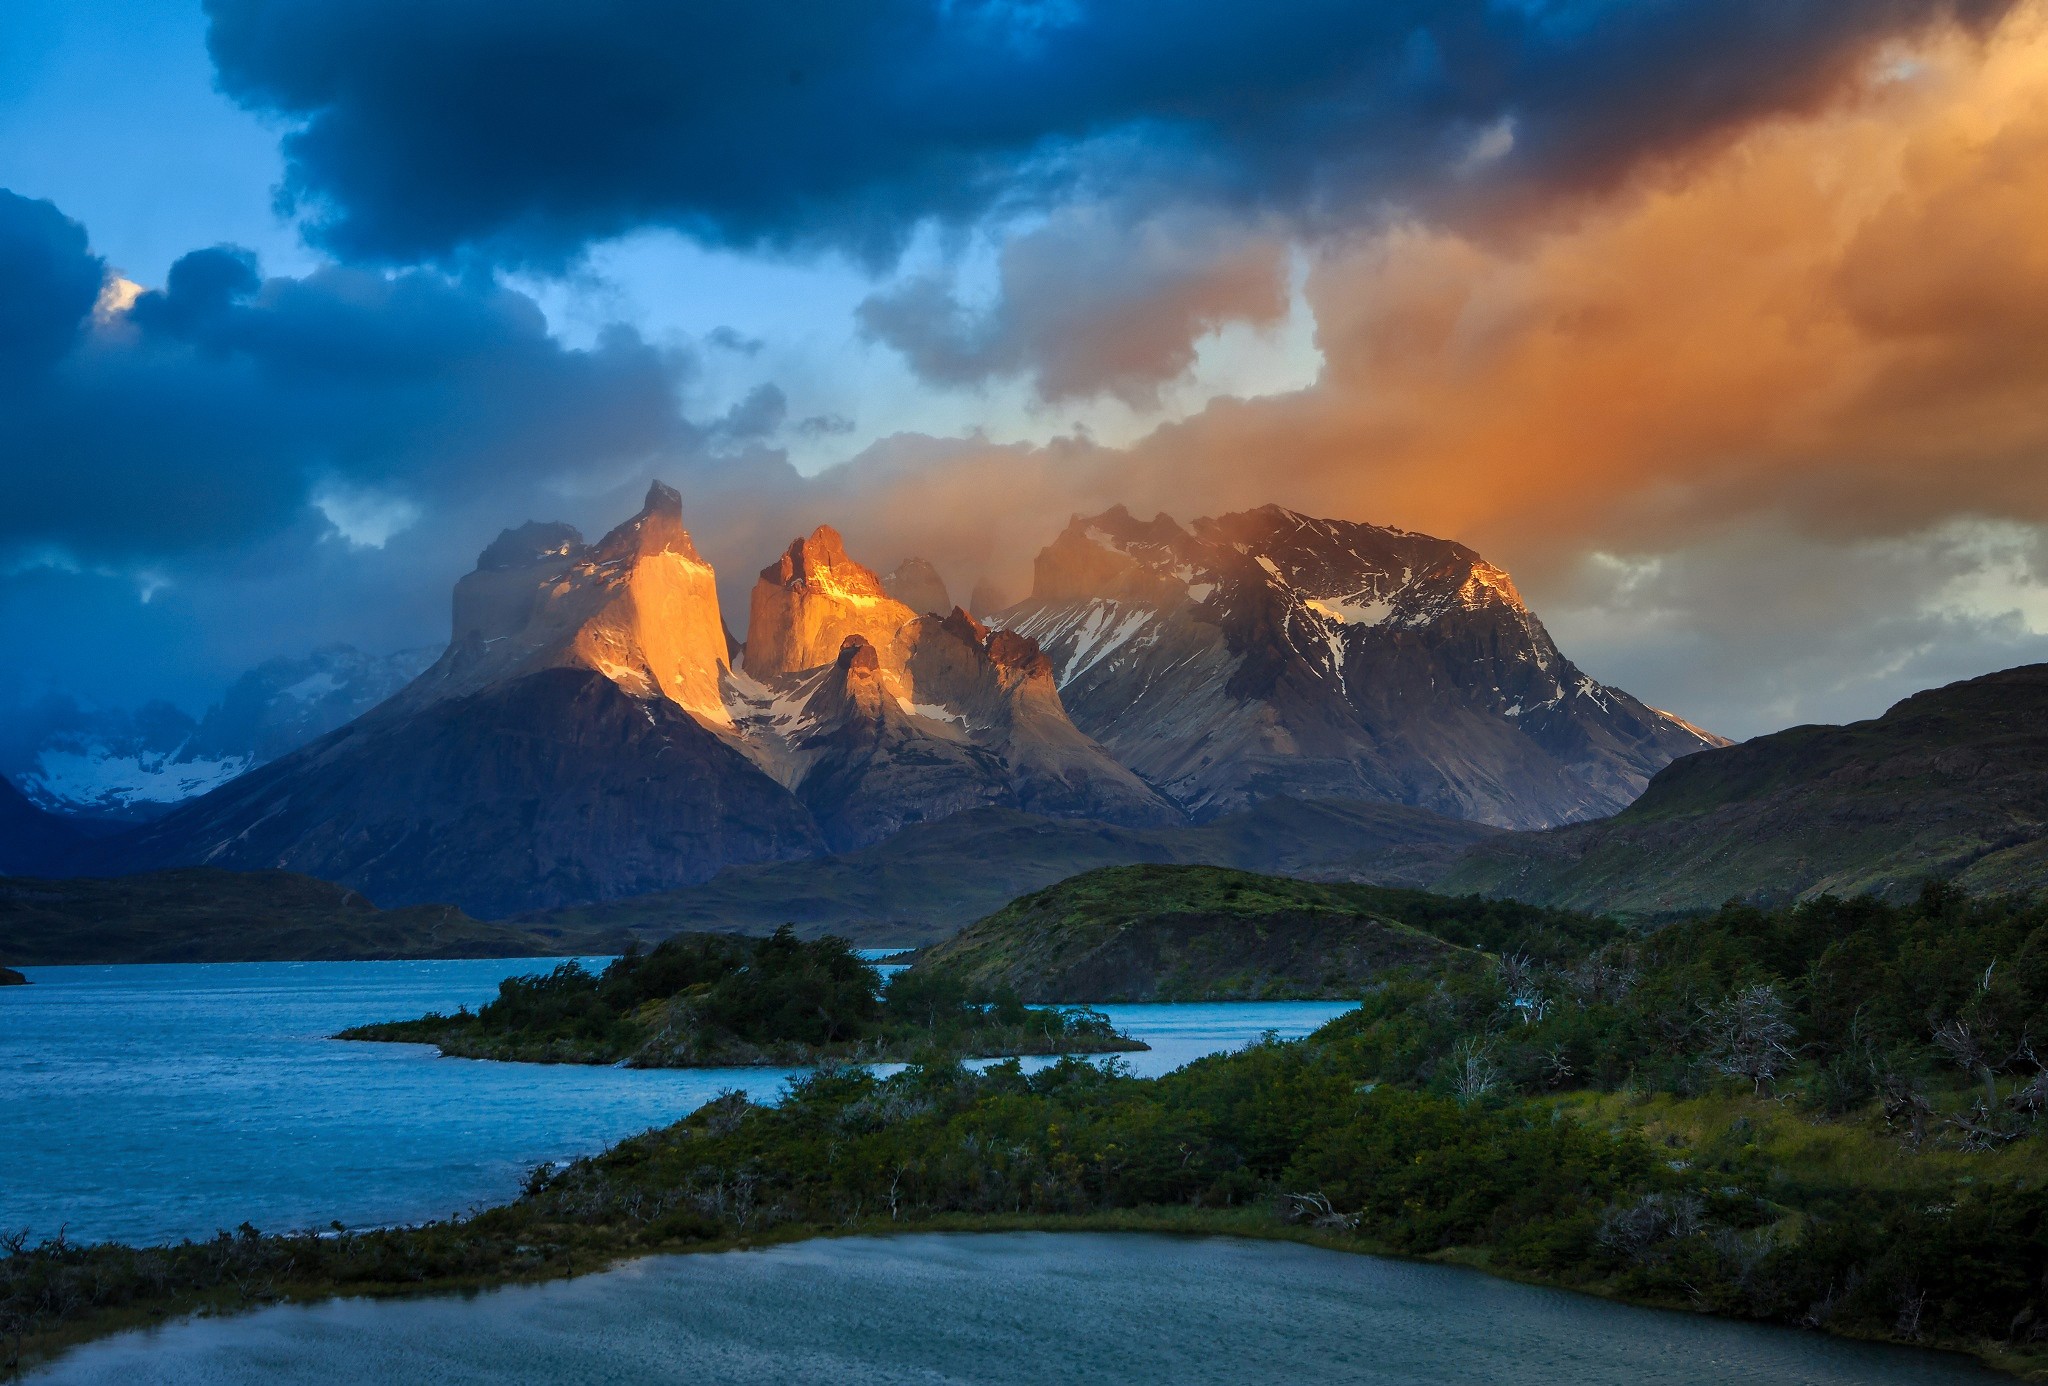 General 2048x1386 landscape Patagonia Torres del Paine lake mountains South America Chile